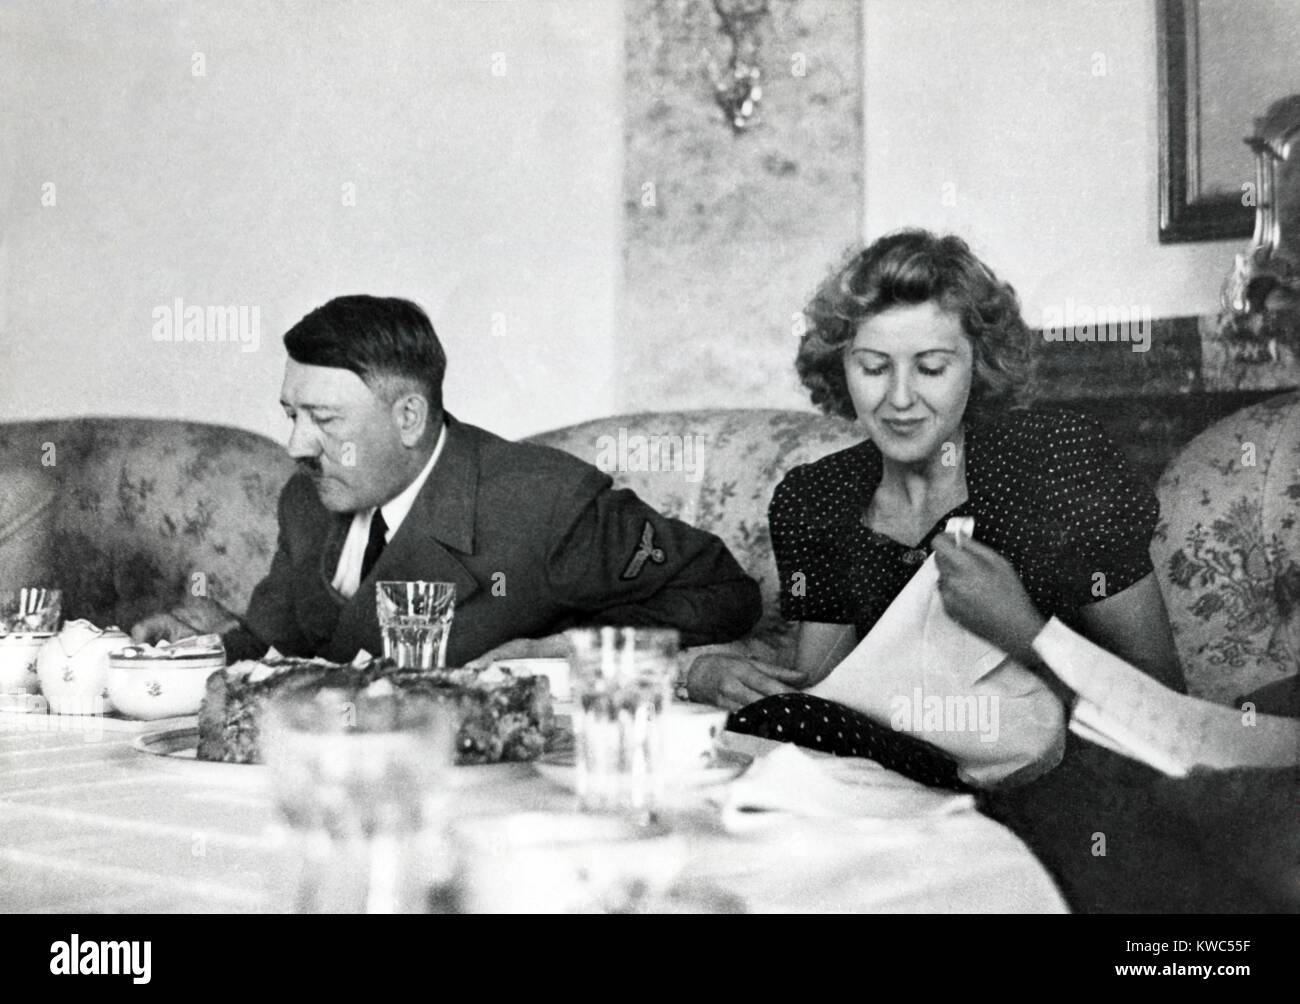 Hitler and Ava Braun at dining table at Berchtesgaden, ca. 1937-1943. Braun was the hostess at informal gatherings, but hidden away when high officials visited the Bavarian retreat. (BSLOC 2015 13 60) Stock Photo